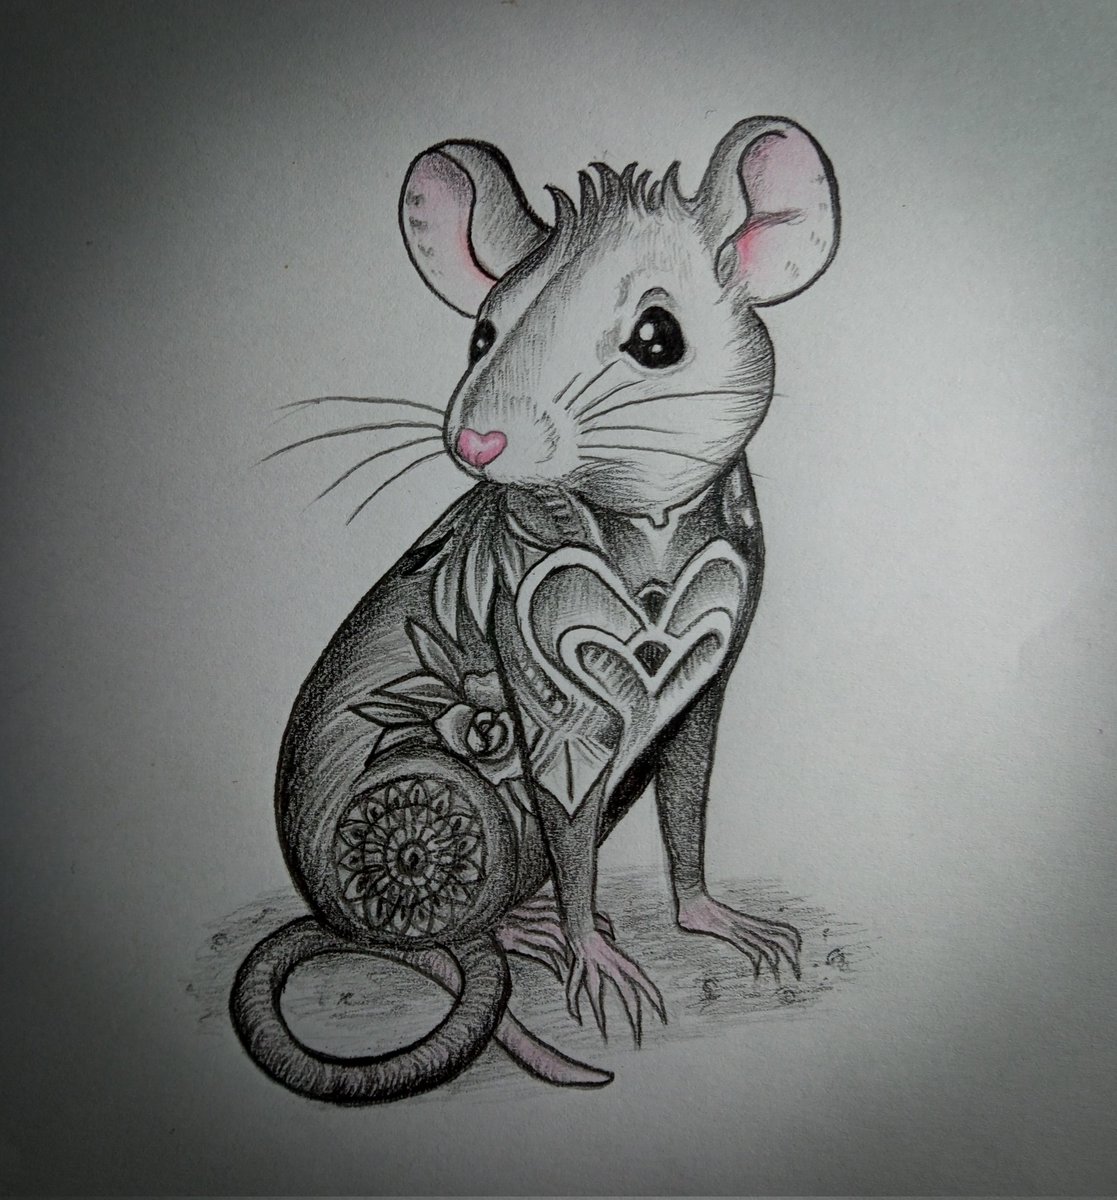 My second piece for the #TezRats event 🐭❤️ by @WeirdNFTArtist and @rata_yonqui 'Miss Ratattoo' Ratattoo was feeling very lonely, so Miss Ratattoo appeared with her charm and elegance to keep him company. 12 ed. | 4,20 $XTZ